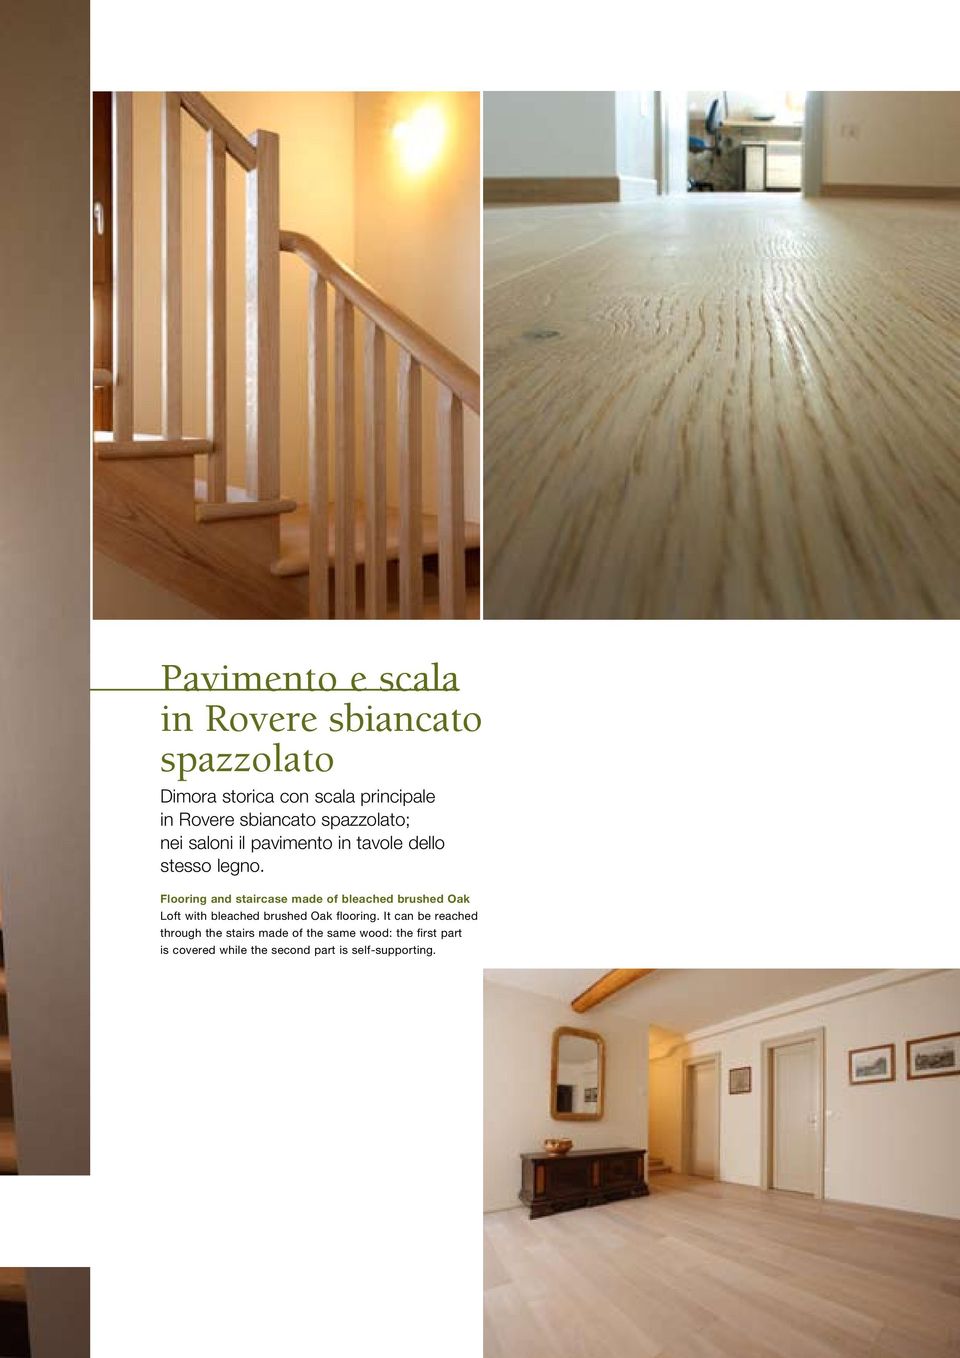 Flooring and staircase made of bleached brushed Oak Loft with bleached brushed Oak flooring.